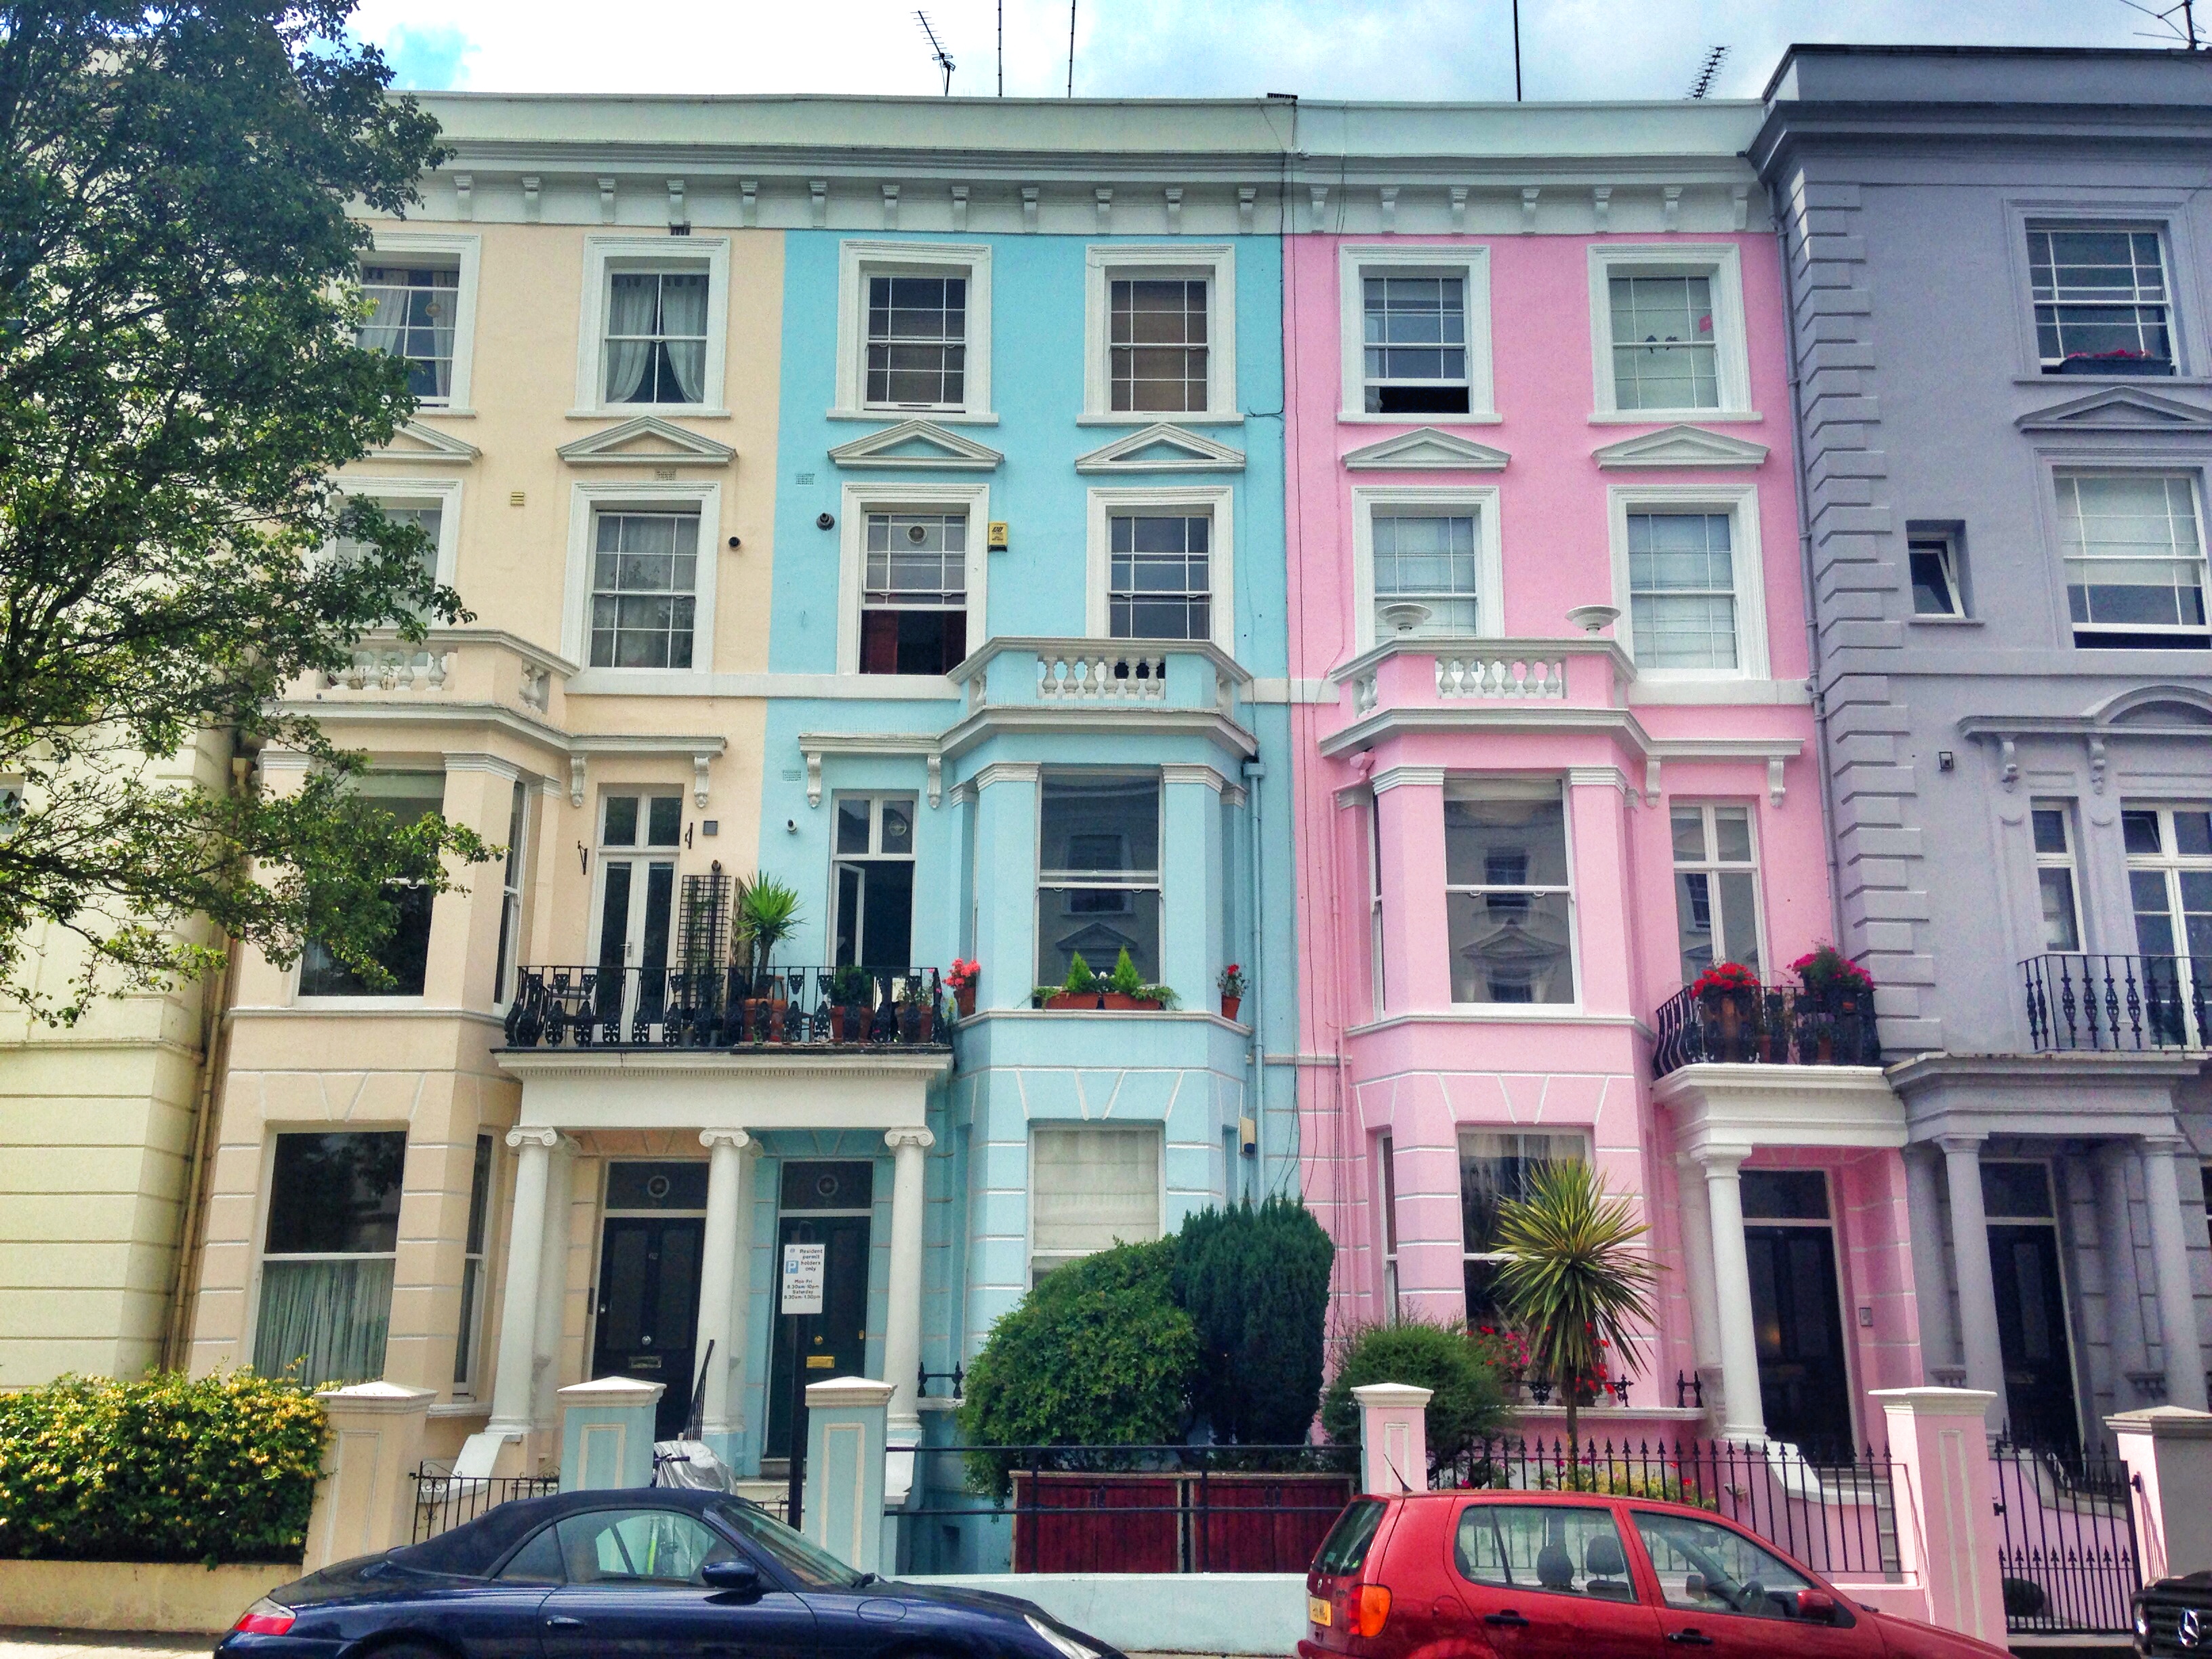 Notting Hill, colourful houses